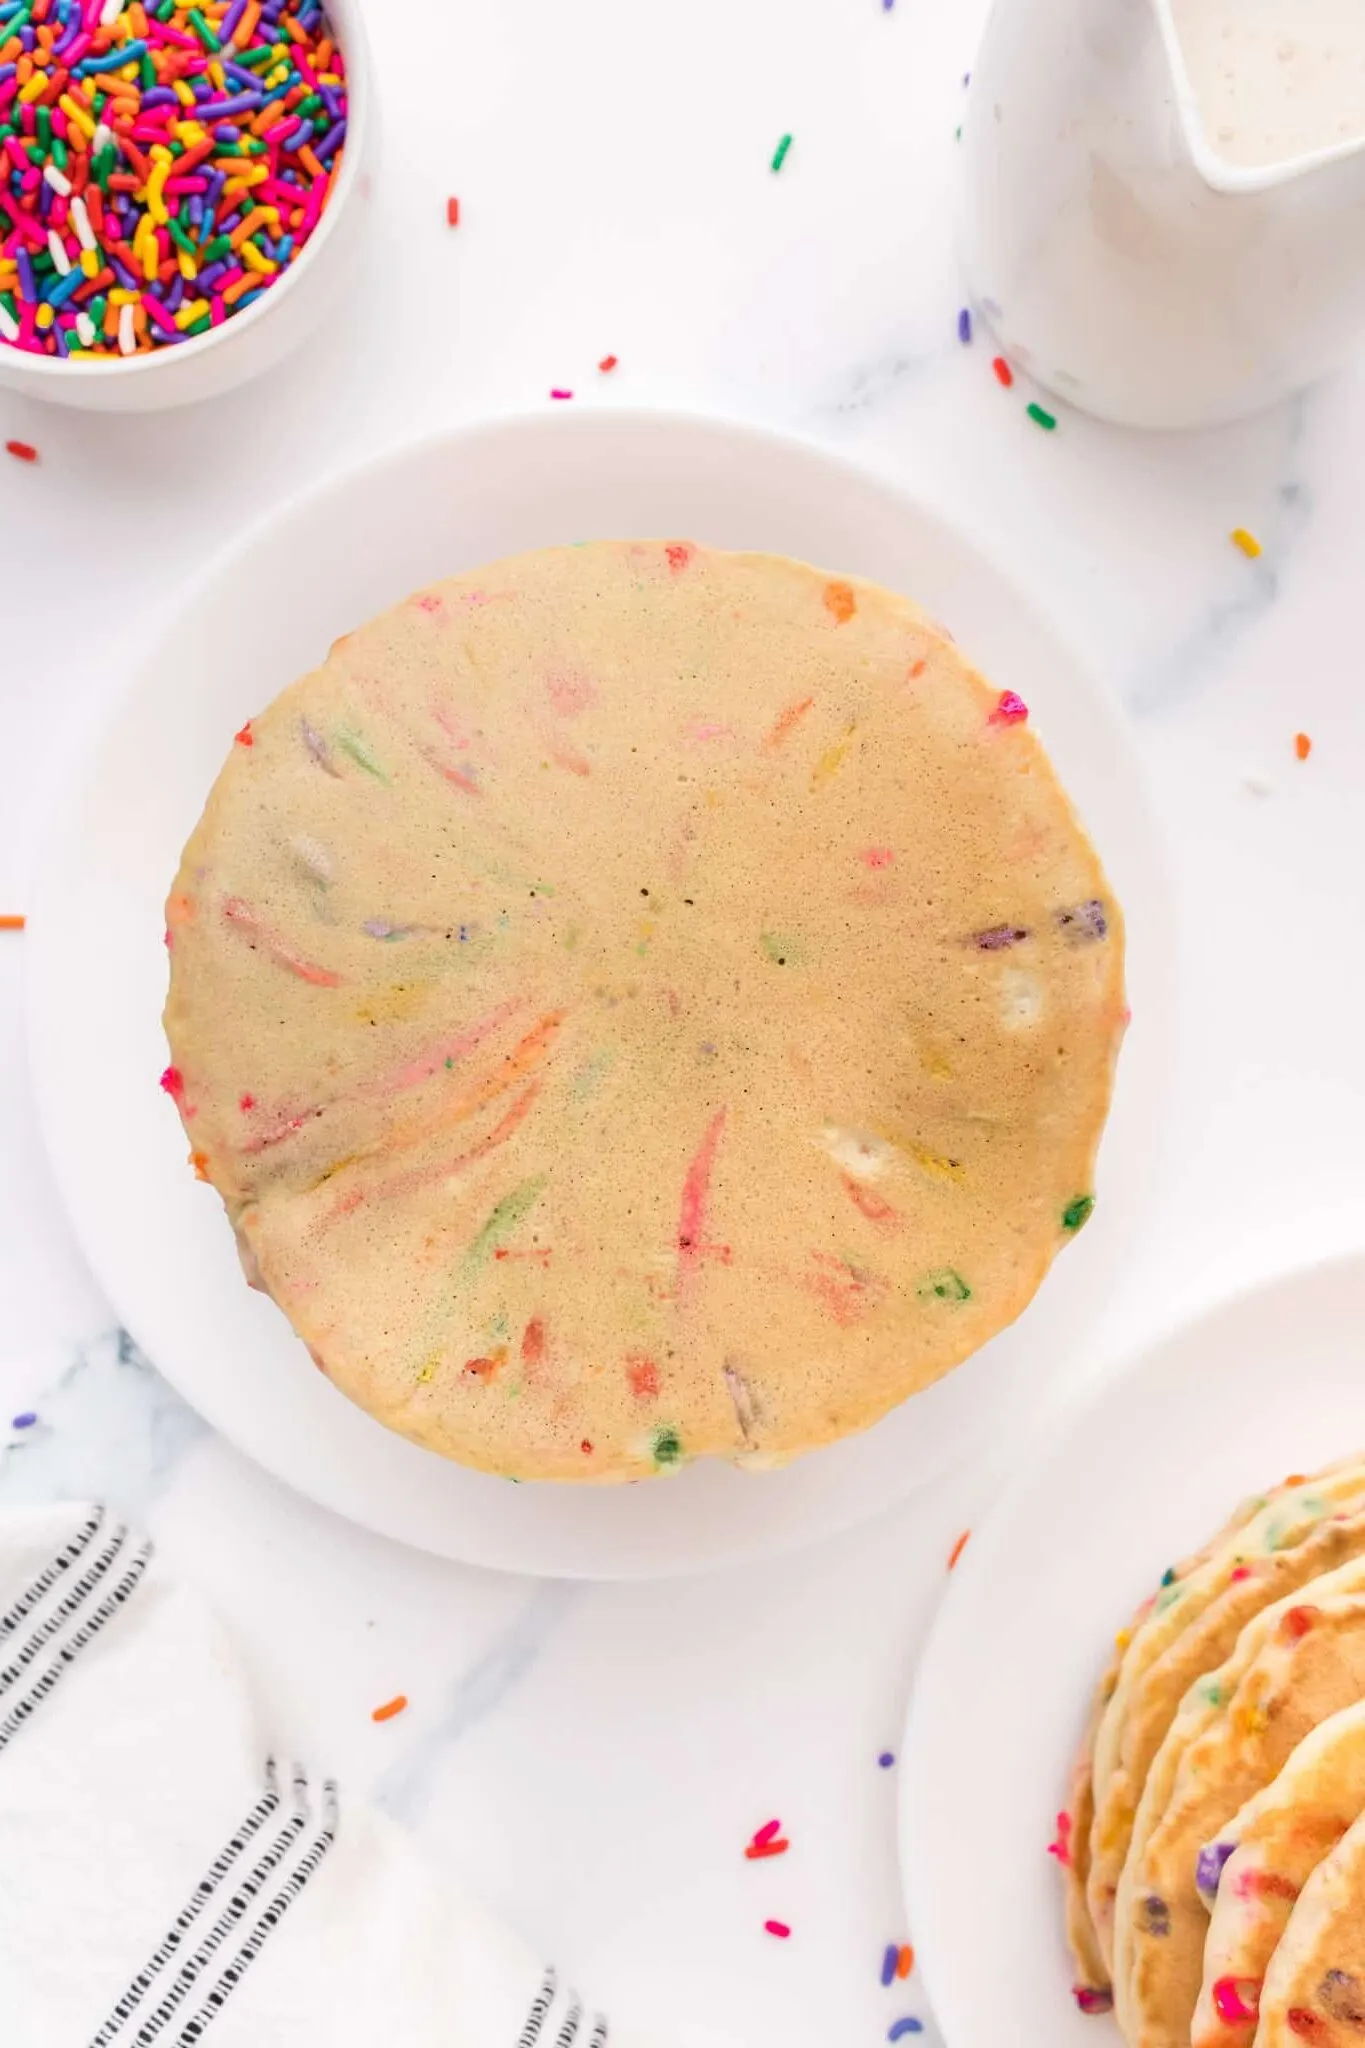 Funfetti Pancakes are a fun and delicious breakfast treat perfect for kid's birthdays.